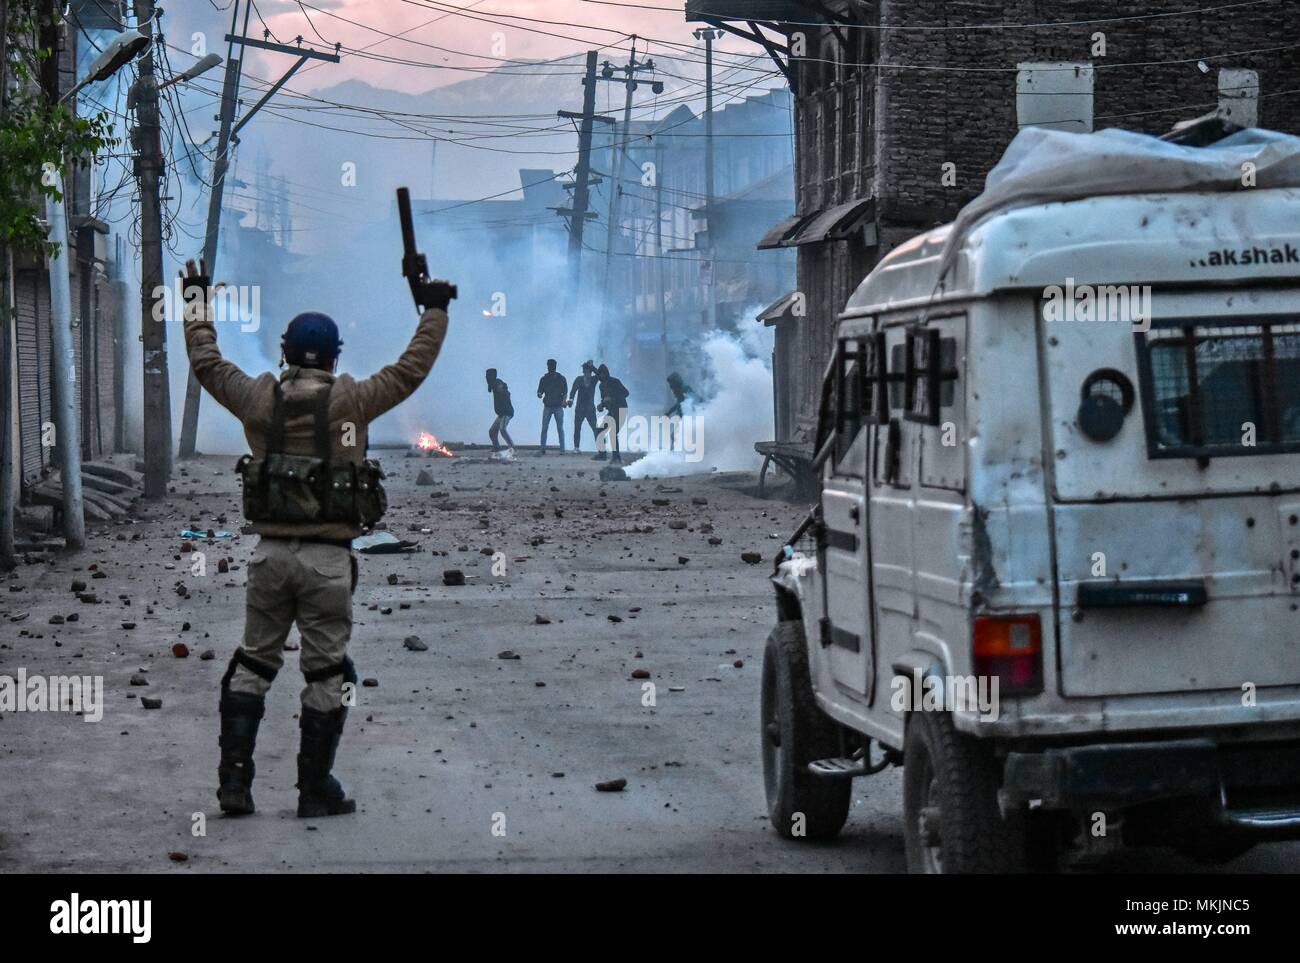 May 8, 2018 - Srinagar, J&K, India - An Indian policeman taunts Kashmiri protesters during clashes in Srinagar, Indian administered Kashmir. Fierce clashes broke out between government forces and Kashmiri protesters in Srinagar on Tuesday as the valley continued to remain tense over the killing of 11 people including 5 militants and 6 civilians in Indian administered Kashmir. Police used tear smoke shells and shot gun pellets to disperse hundreds of demonstrators who hurled rocks and chanted anti-Indian and pro-freedom slogans. Credit: Saqib Majeed/SOPA Images/ZUMA Wire/Alamy Live News Stock Photo